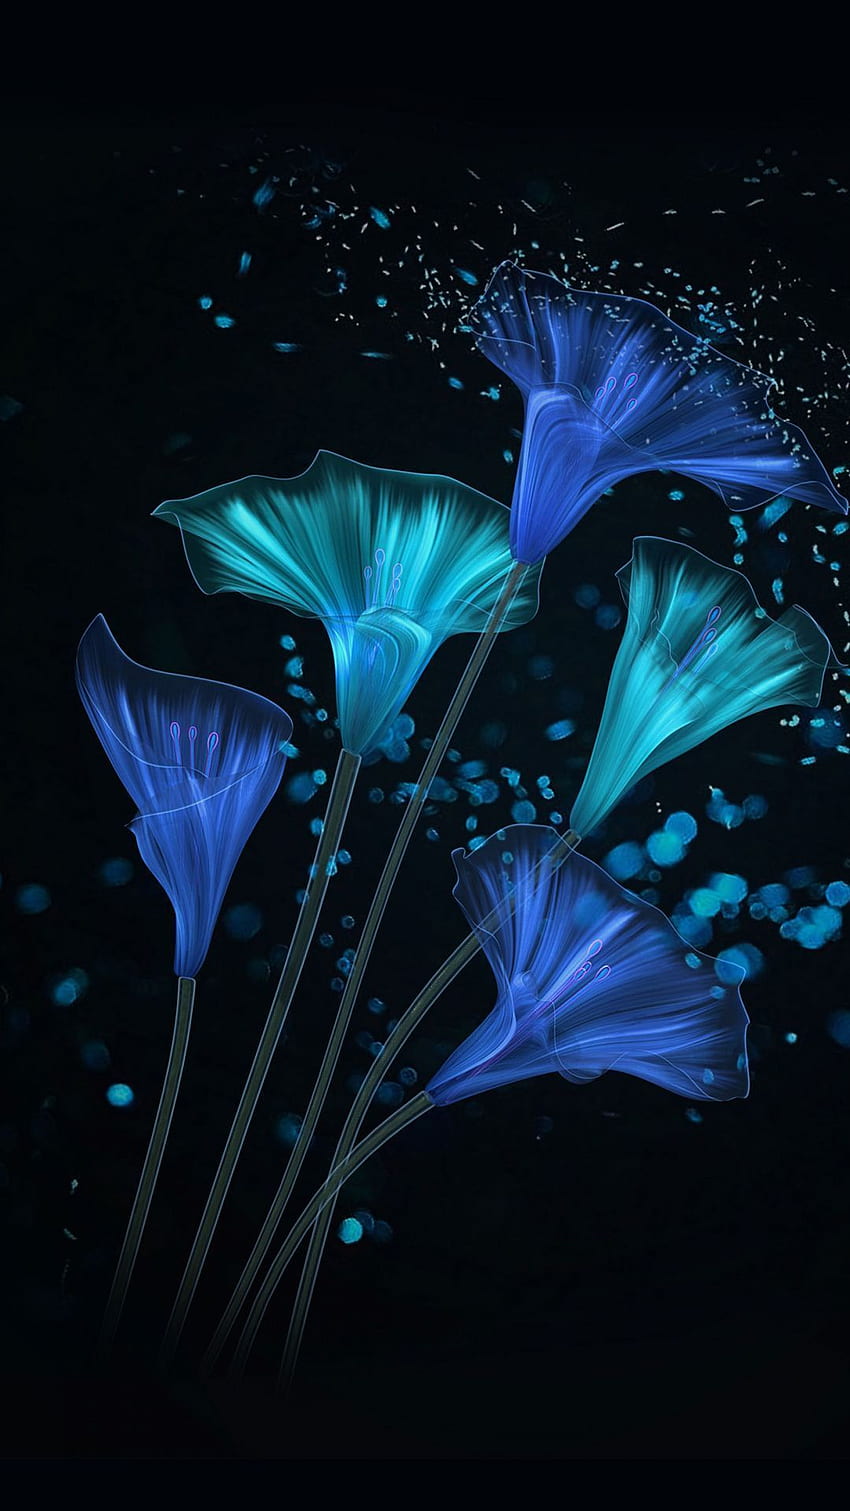 Download A soothing array of Blue Flowers for a calming Aesthetic Wallpaper   Wallpaperscom